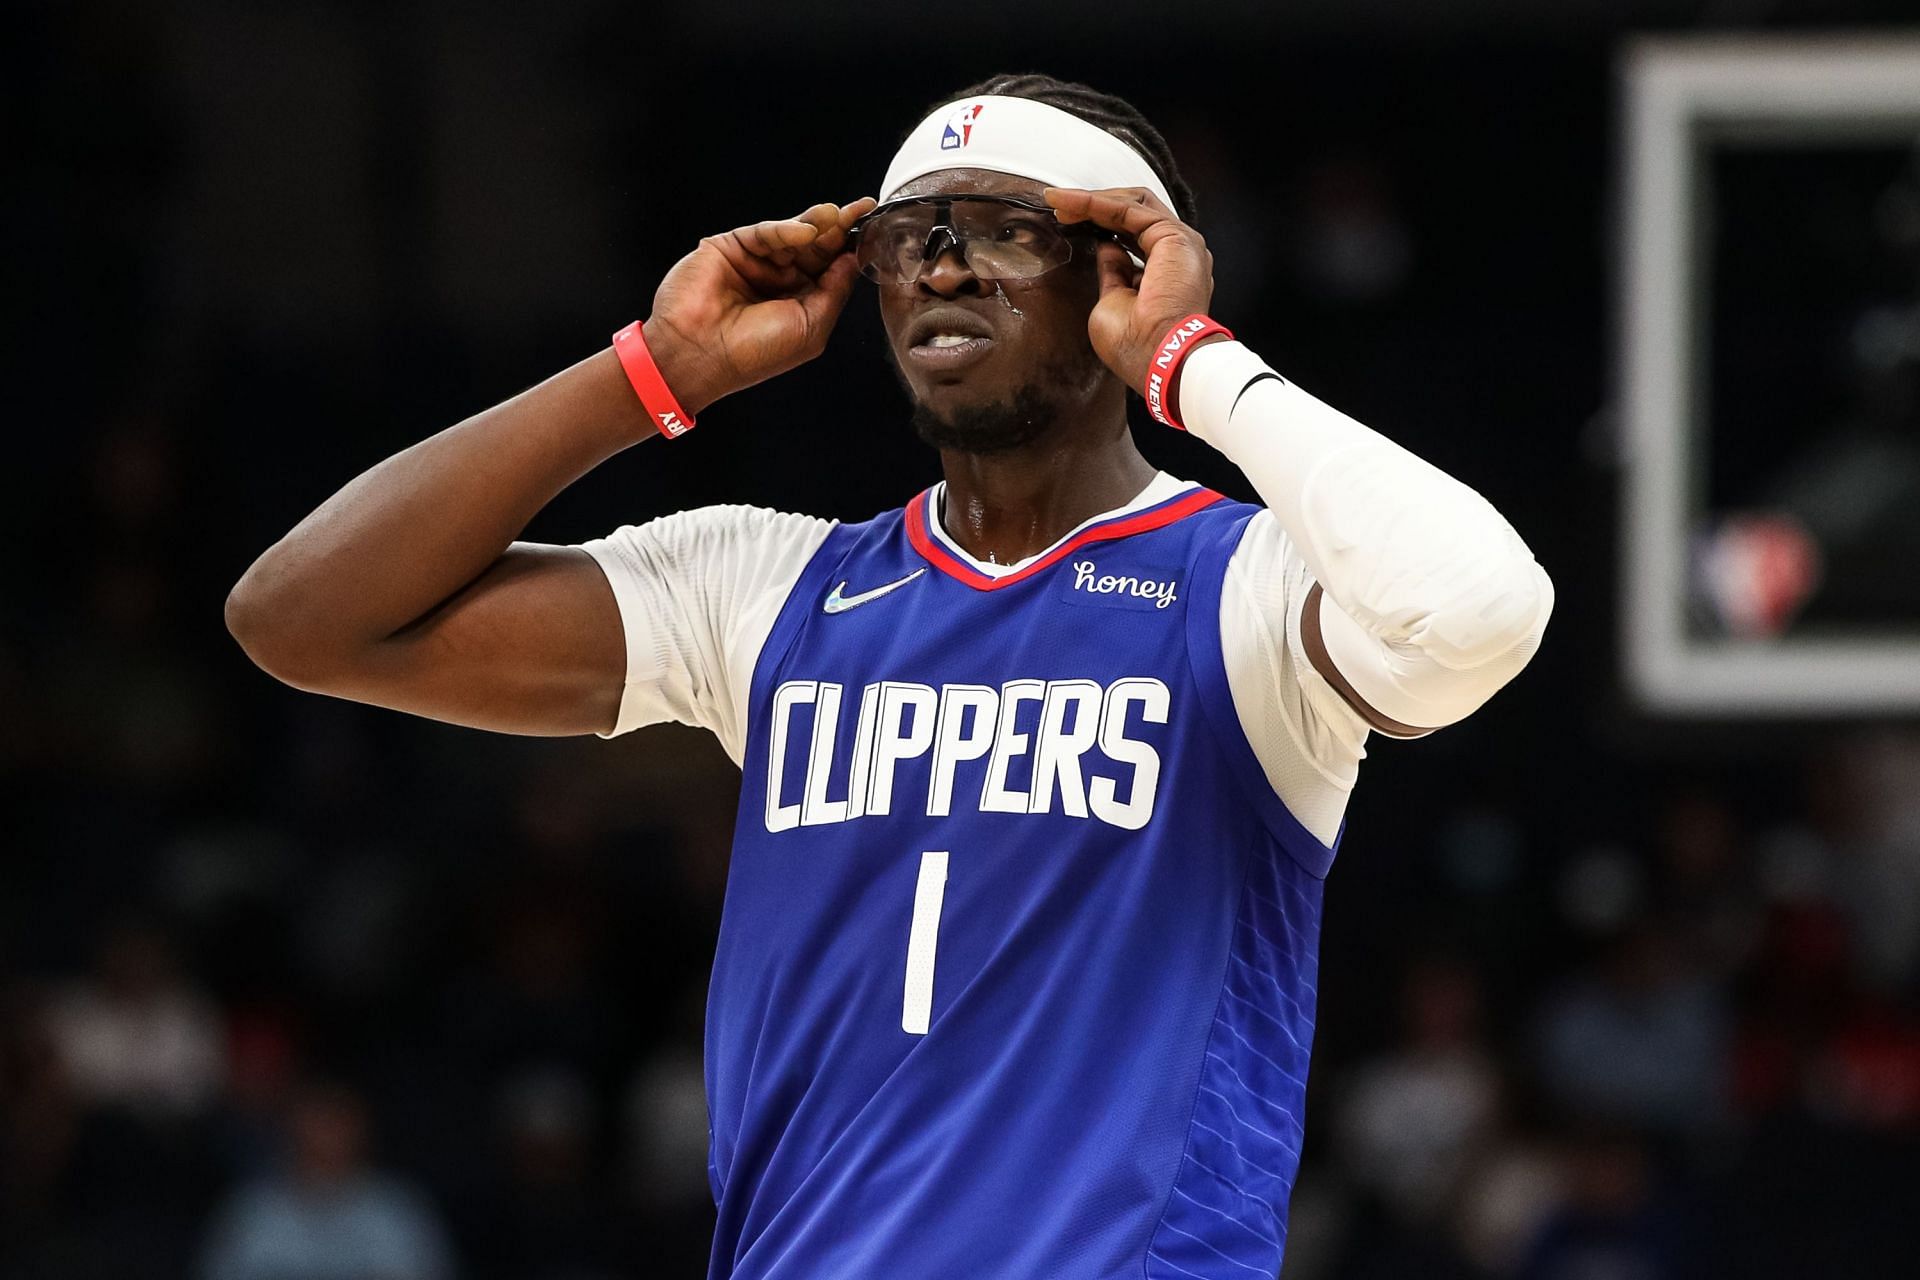 Reggie Jackson scored 22 points as the Los Angeles Clippers edged past Miami on Thursday